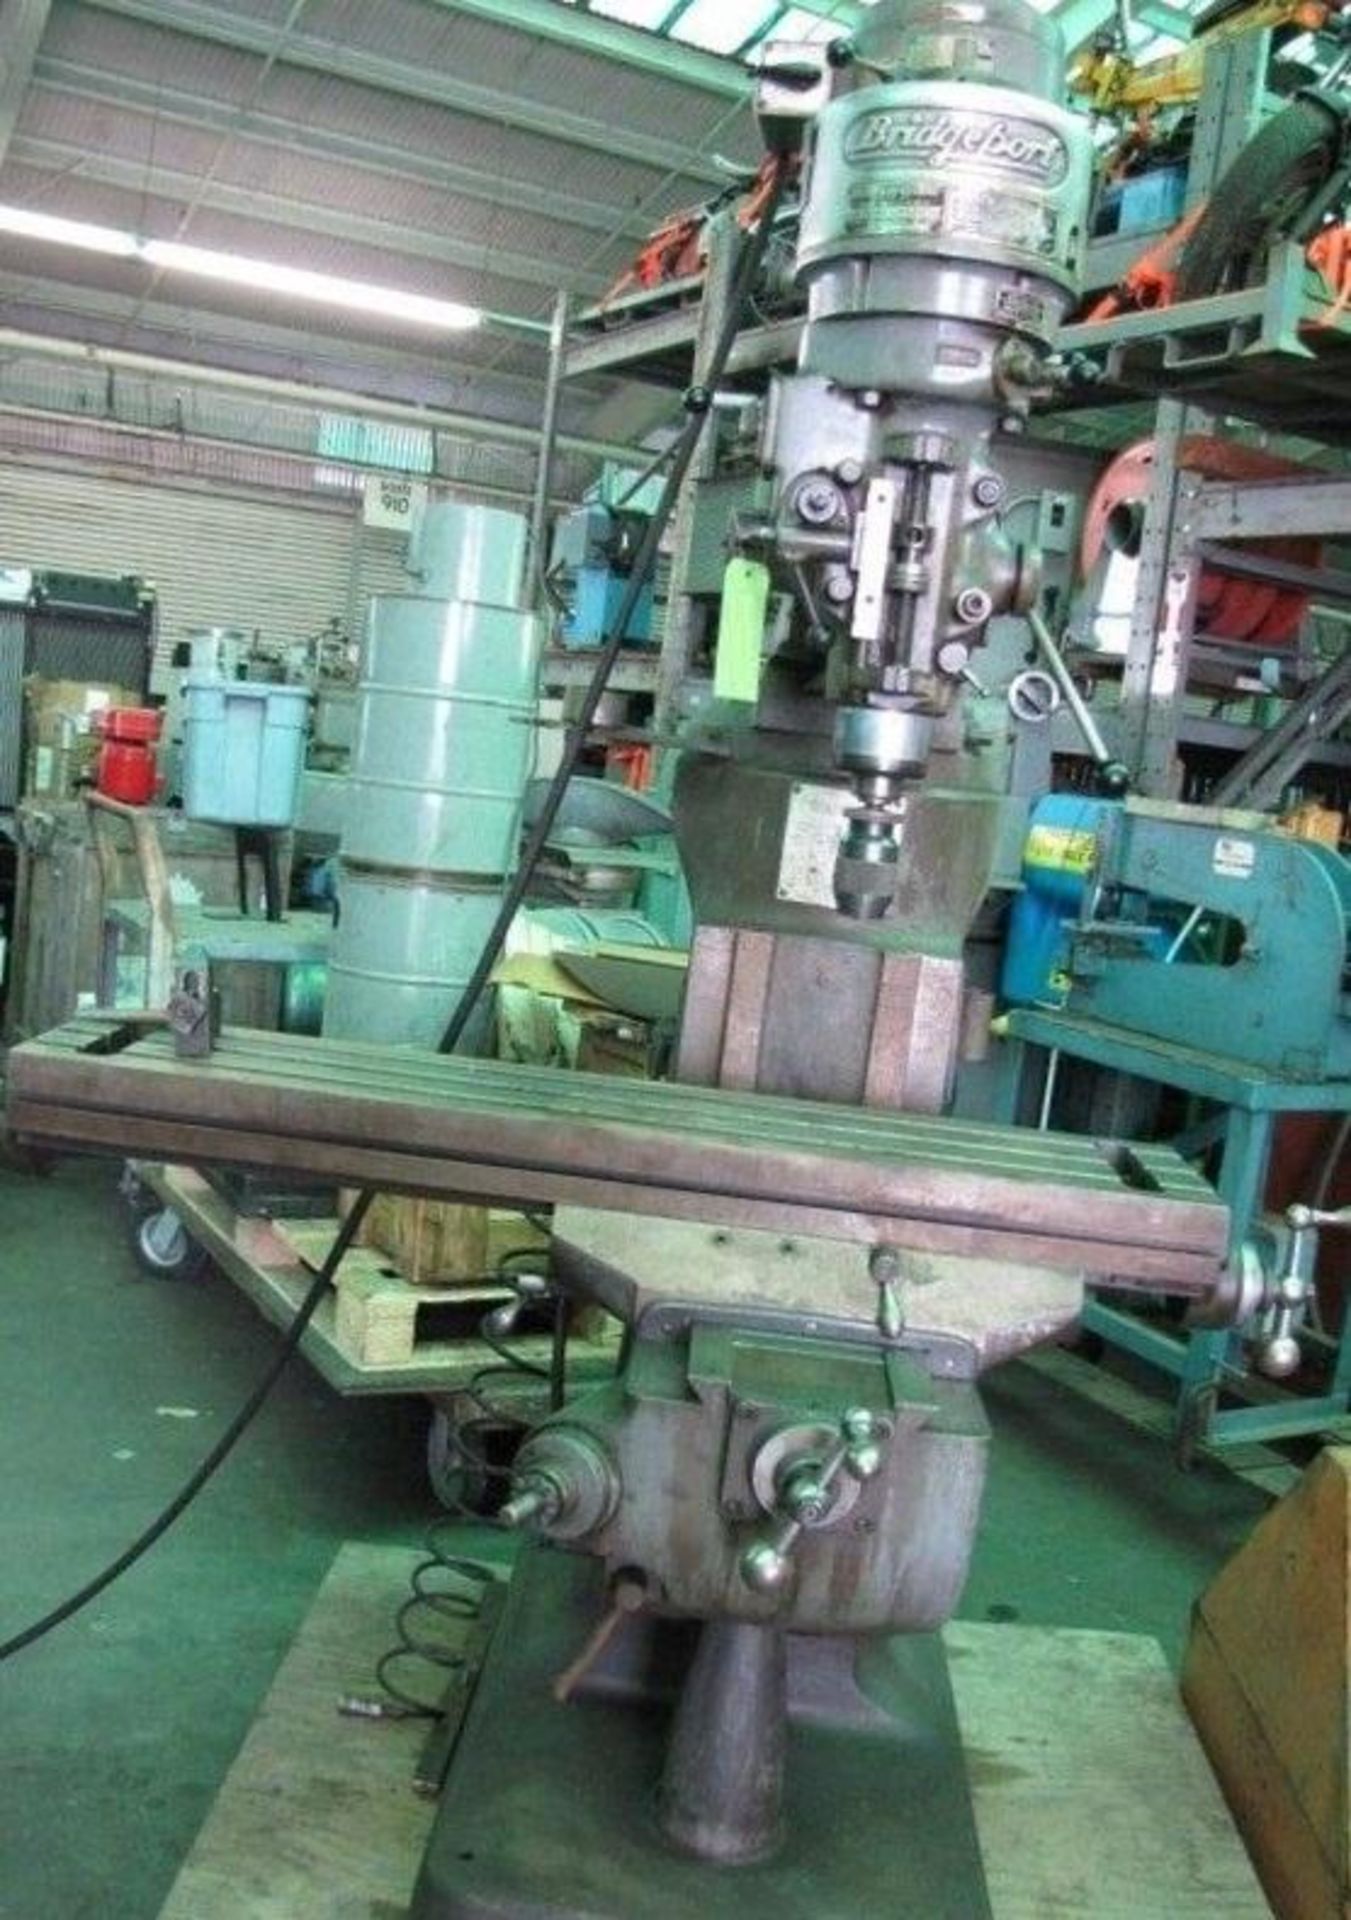 Bridgeport Series 1 Milling Machine with 9 x 42" table, 220/460V 3 phase